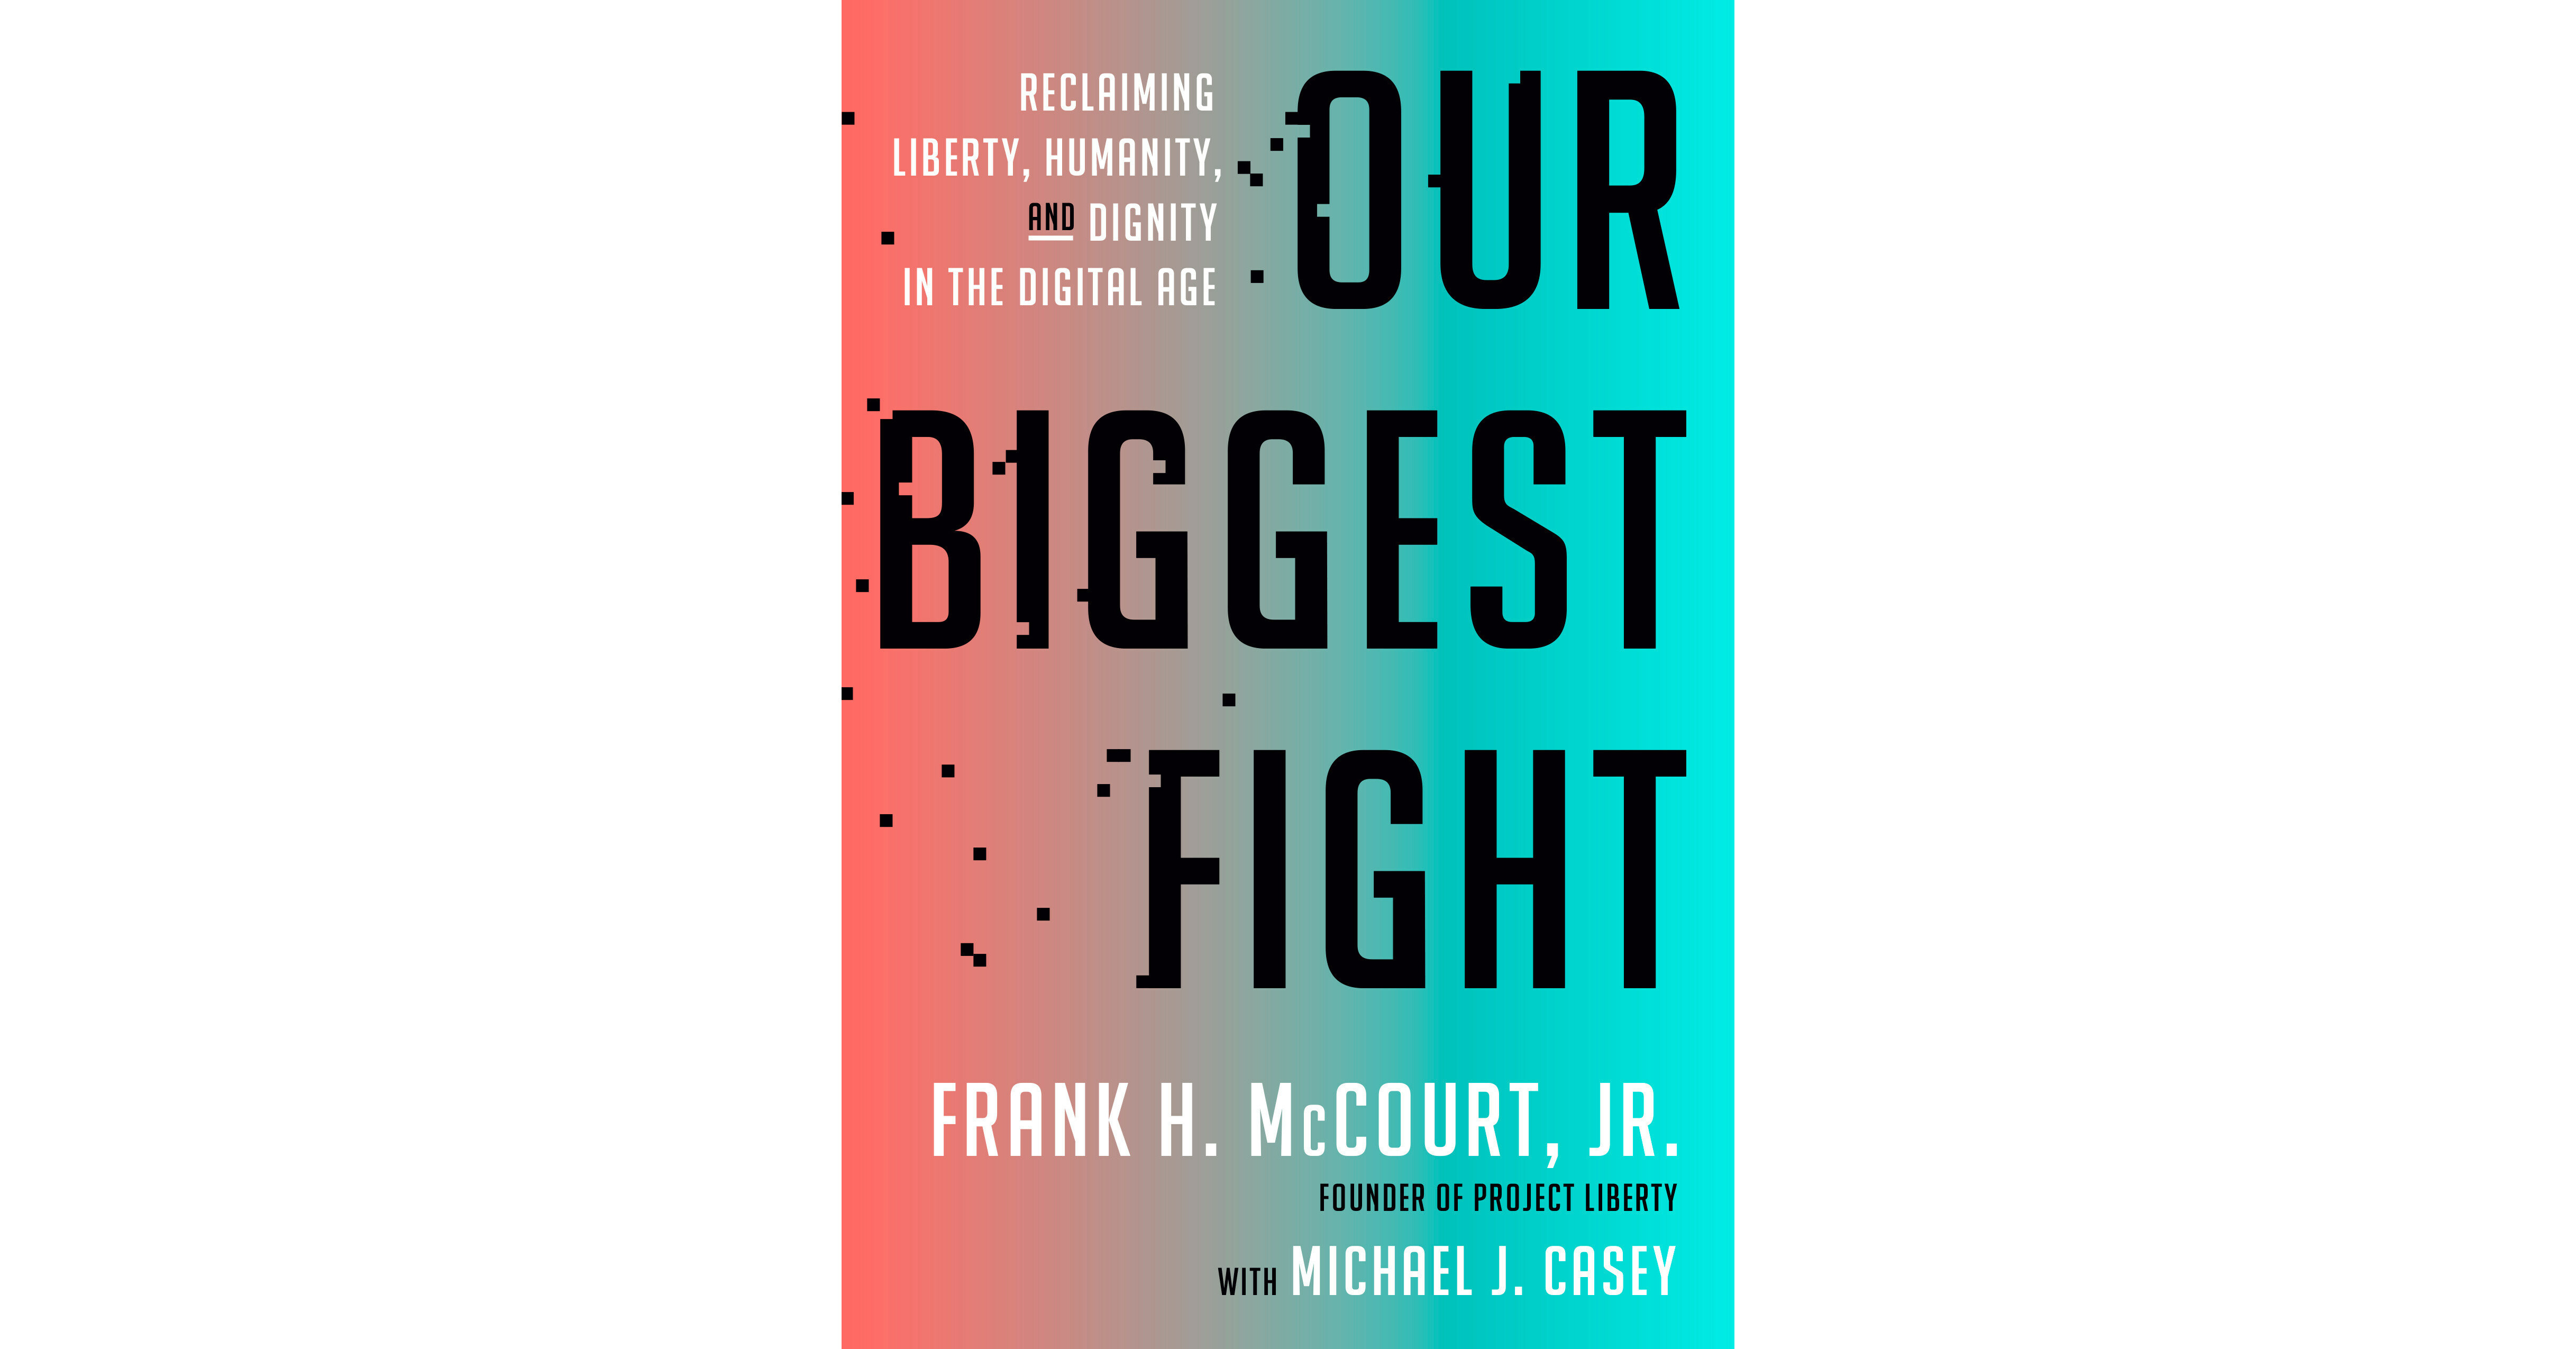 OUR BIGGEST FIGHT Reclaiming Liberty, Humanity, and Dignity in the Digital Age, a New Book by